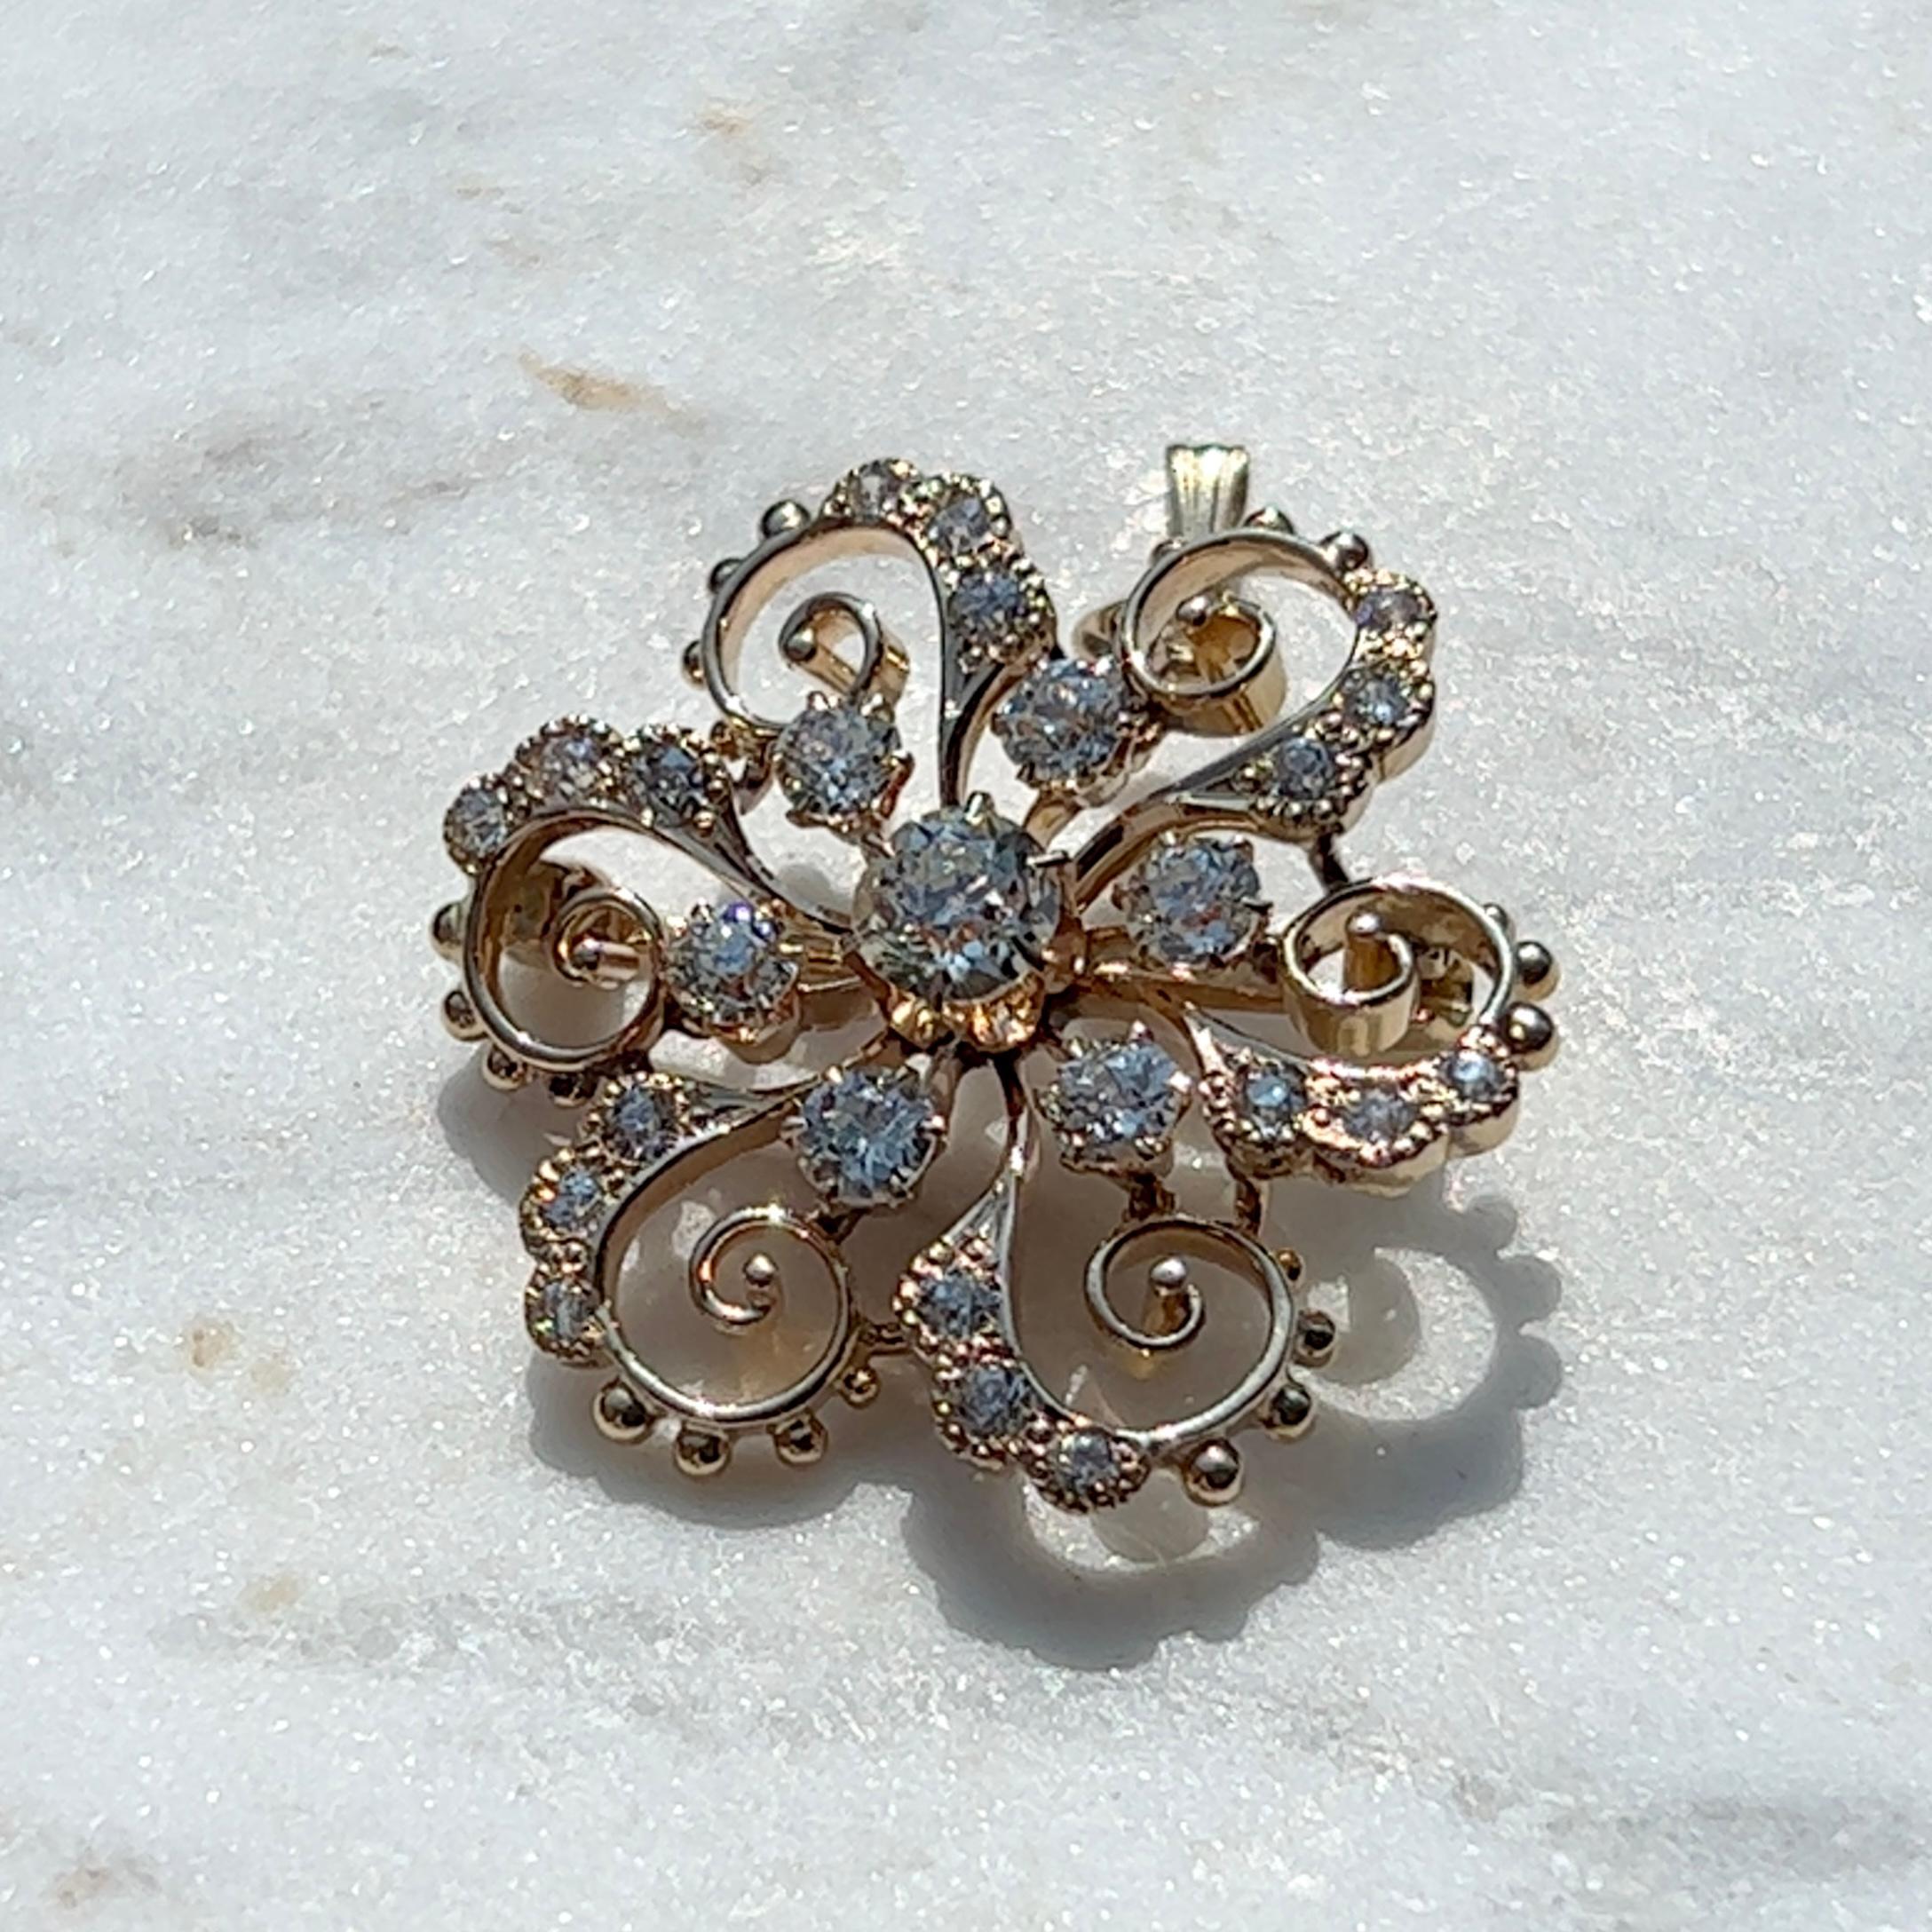 One 14 karat yellow gold Edwardian cluster pin/pendant set with twenty-five (25) old European cut diamonds, approximately 1.15 carats total weight with matching J/K color and SI1 clarity.  The pin measures one inch and is complete with traditional